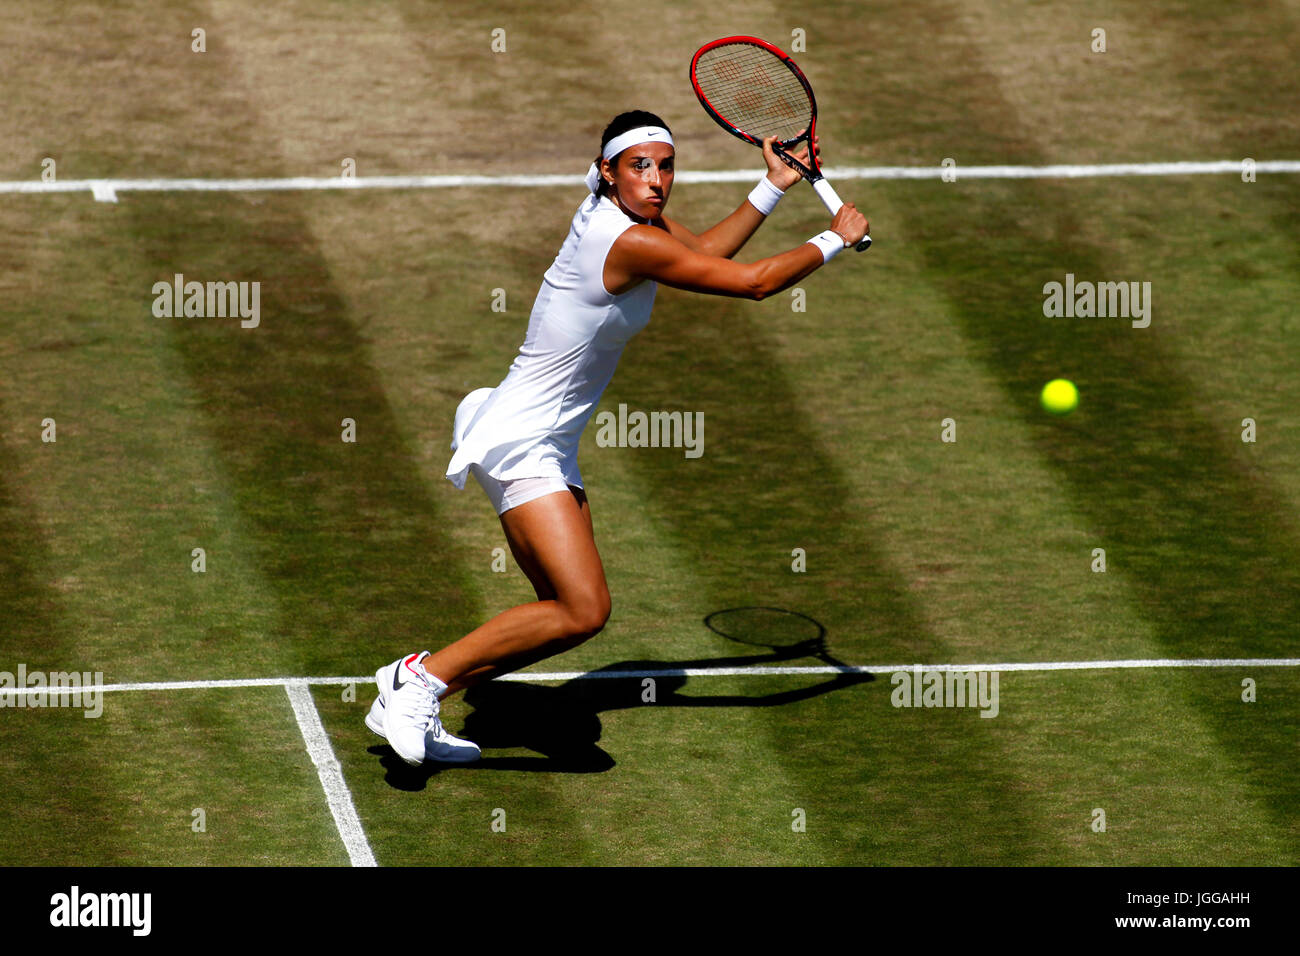 London, UK. 07th July, 2017. London, 7 July, 2017 - France's Caroline Garcia in action against Madison Brengle of the United States during third round action at Wimbledon. Credit: Adam Stoltman/Alamy Live News Stock Photo